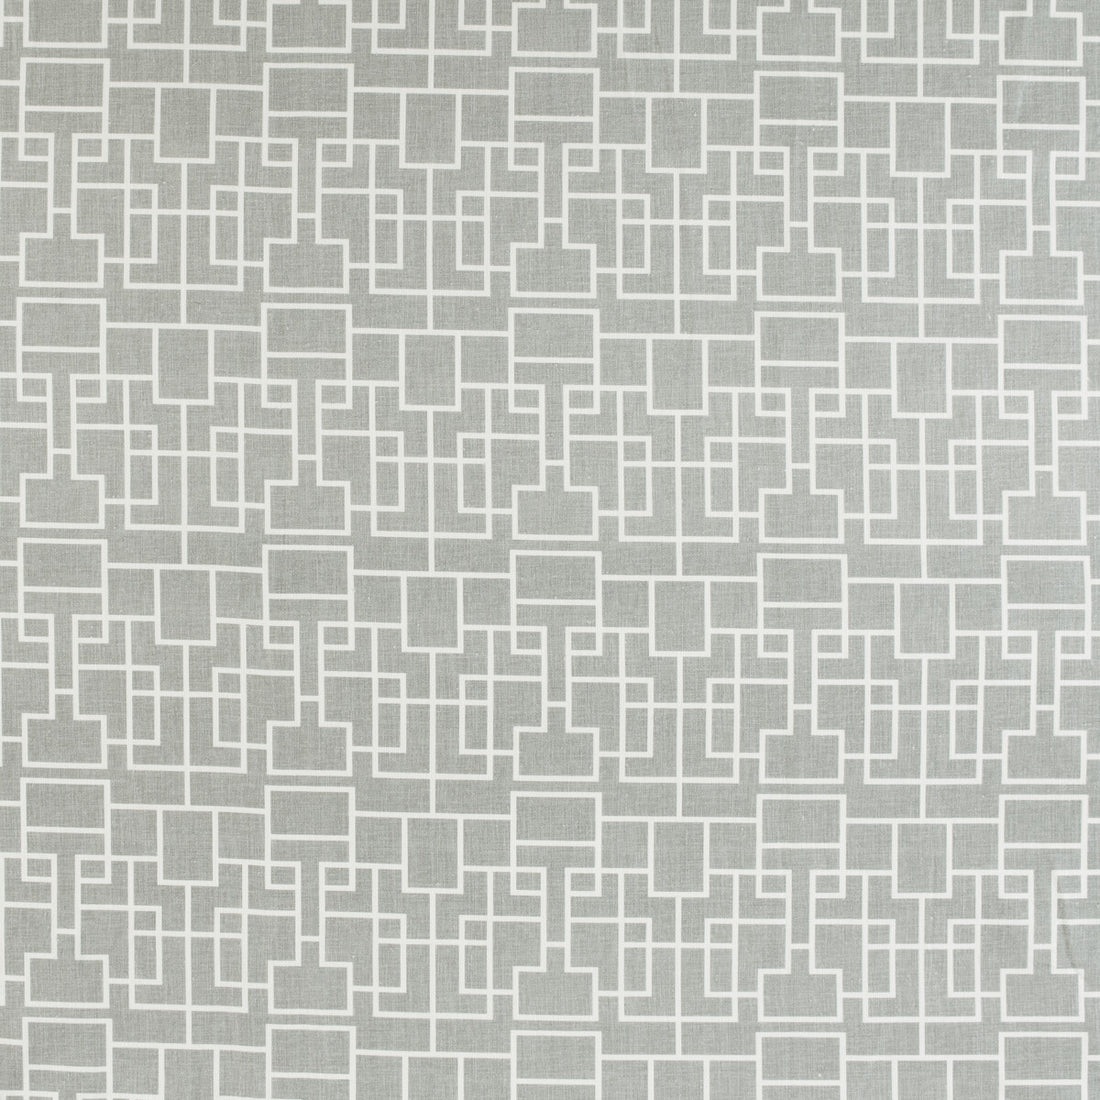 Garden Key fabric in dove color - pattern GARDEN KEY.16.0 - by Kravet Design in the Barbara Barry Home Midsummer collection